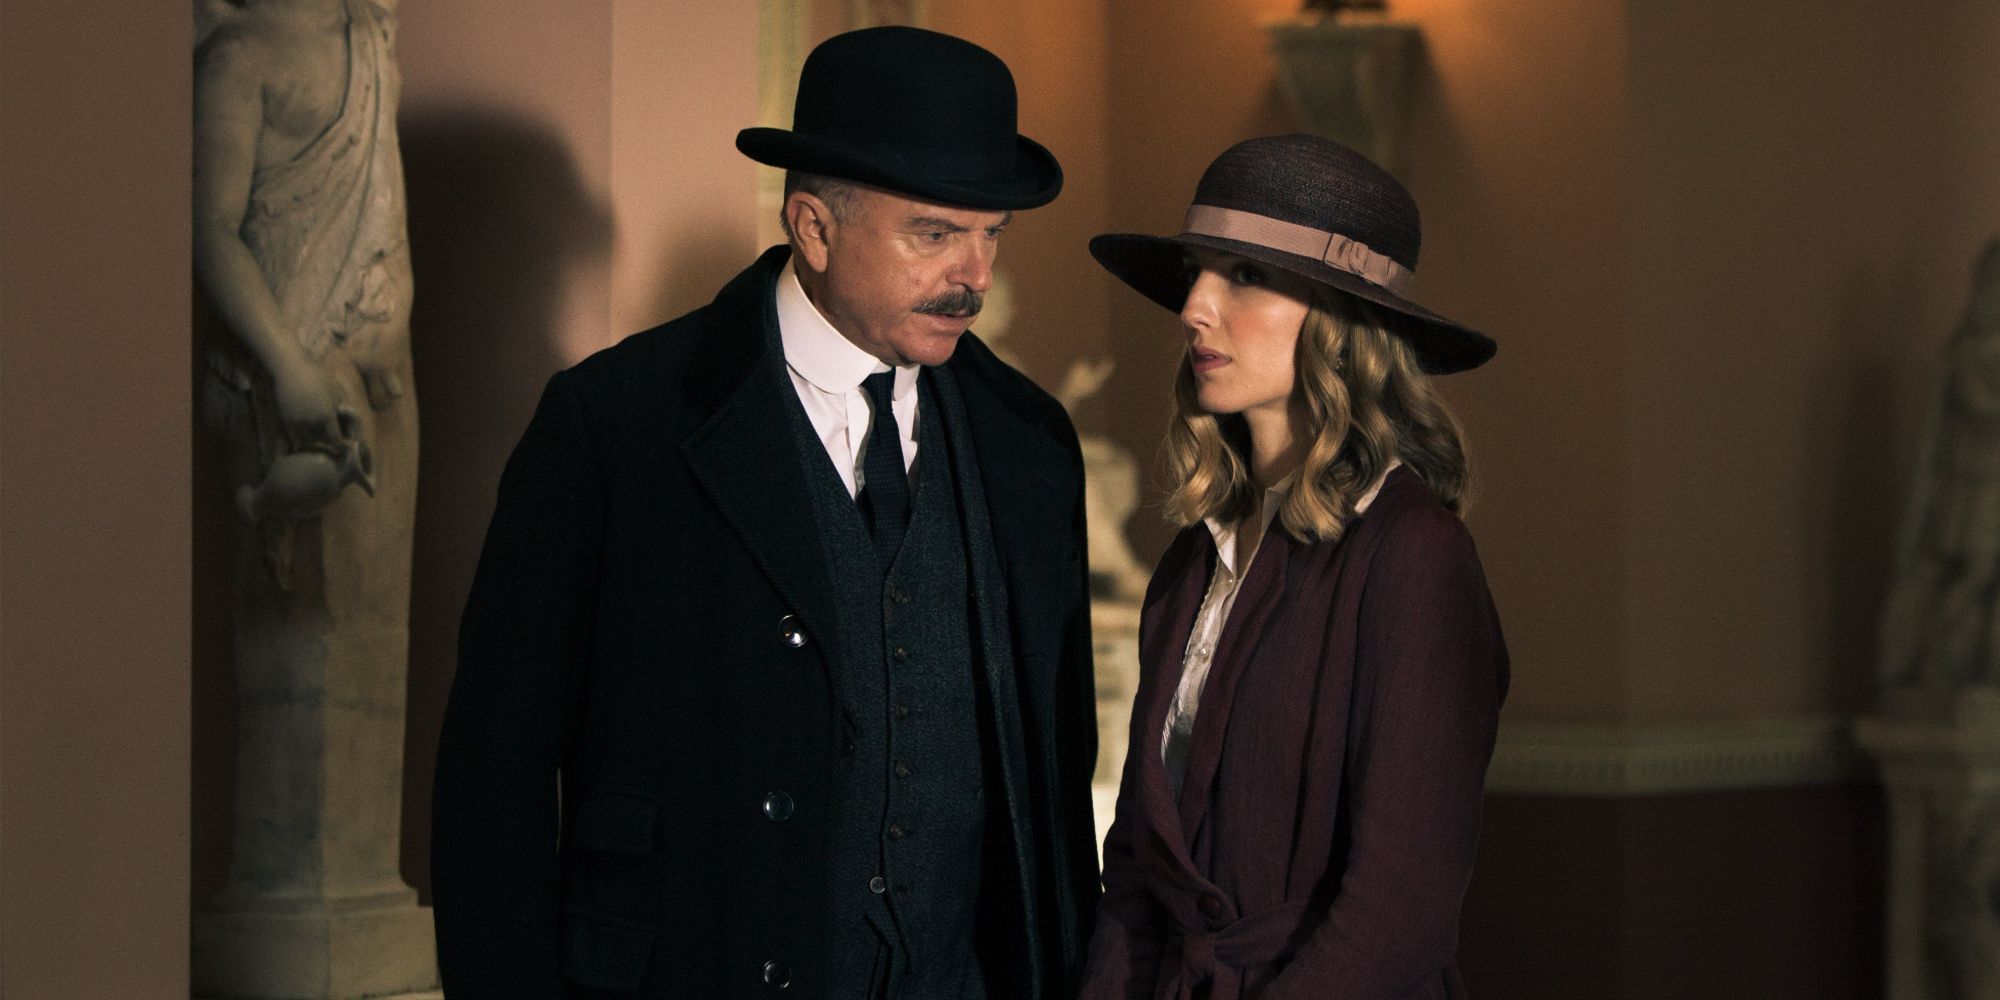 Inspector Campbell and Grace Shelby talking in a museum in Peaky Blinders